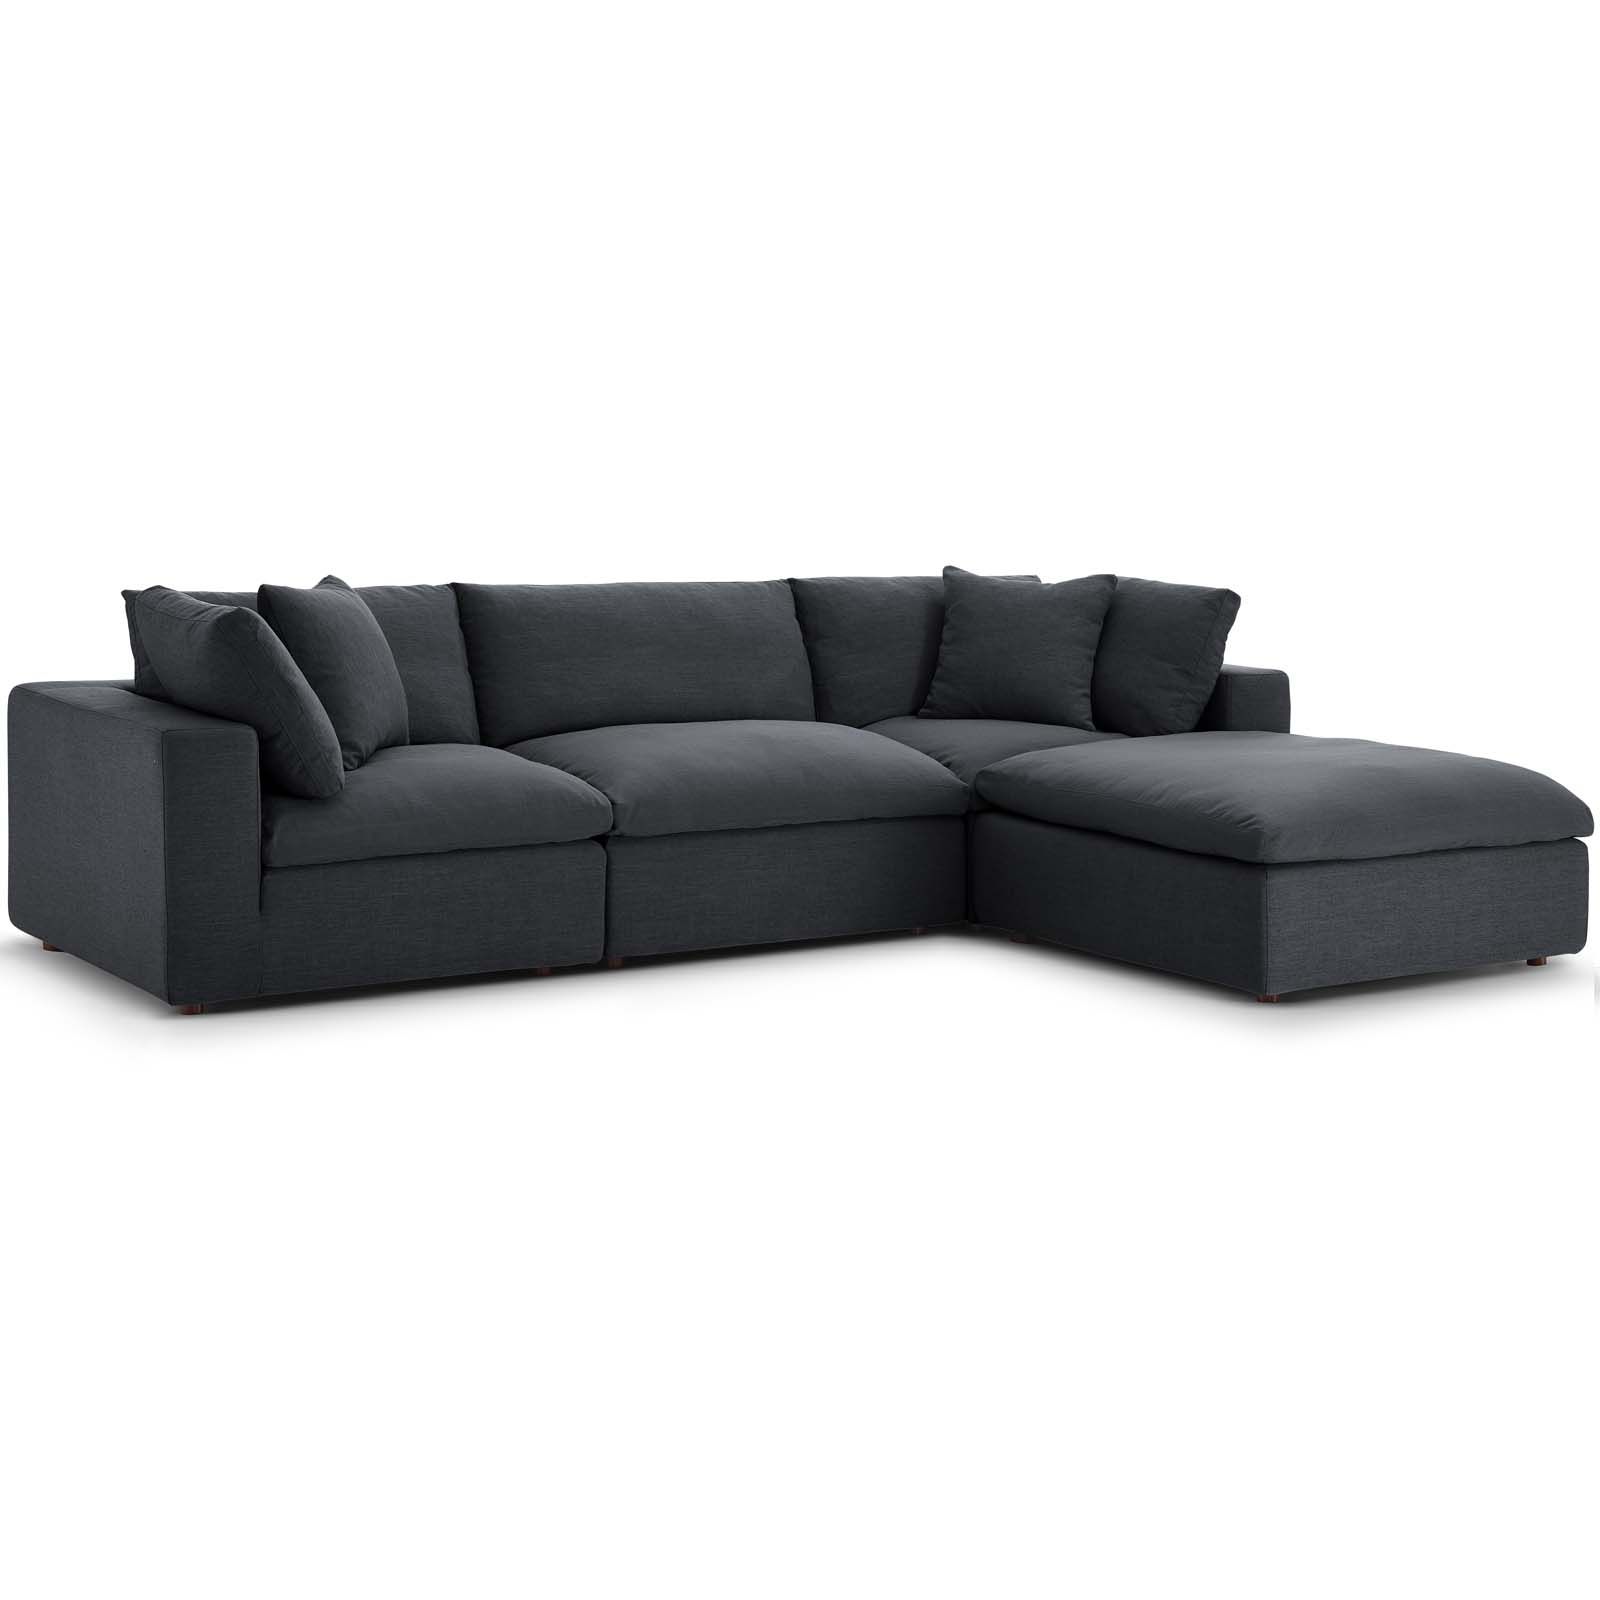 Commix Down Filled Overstuffed 4 Piece Sectional Sofa Set Gray Pertaining To Down Filled Sofas (View 4 of 15)